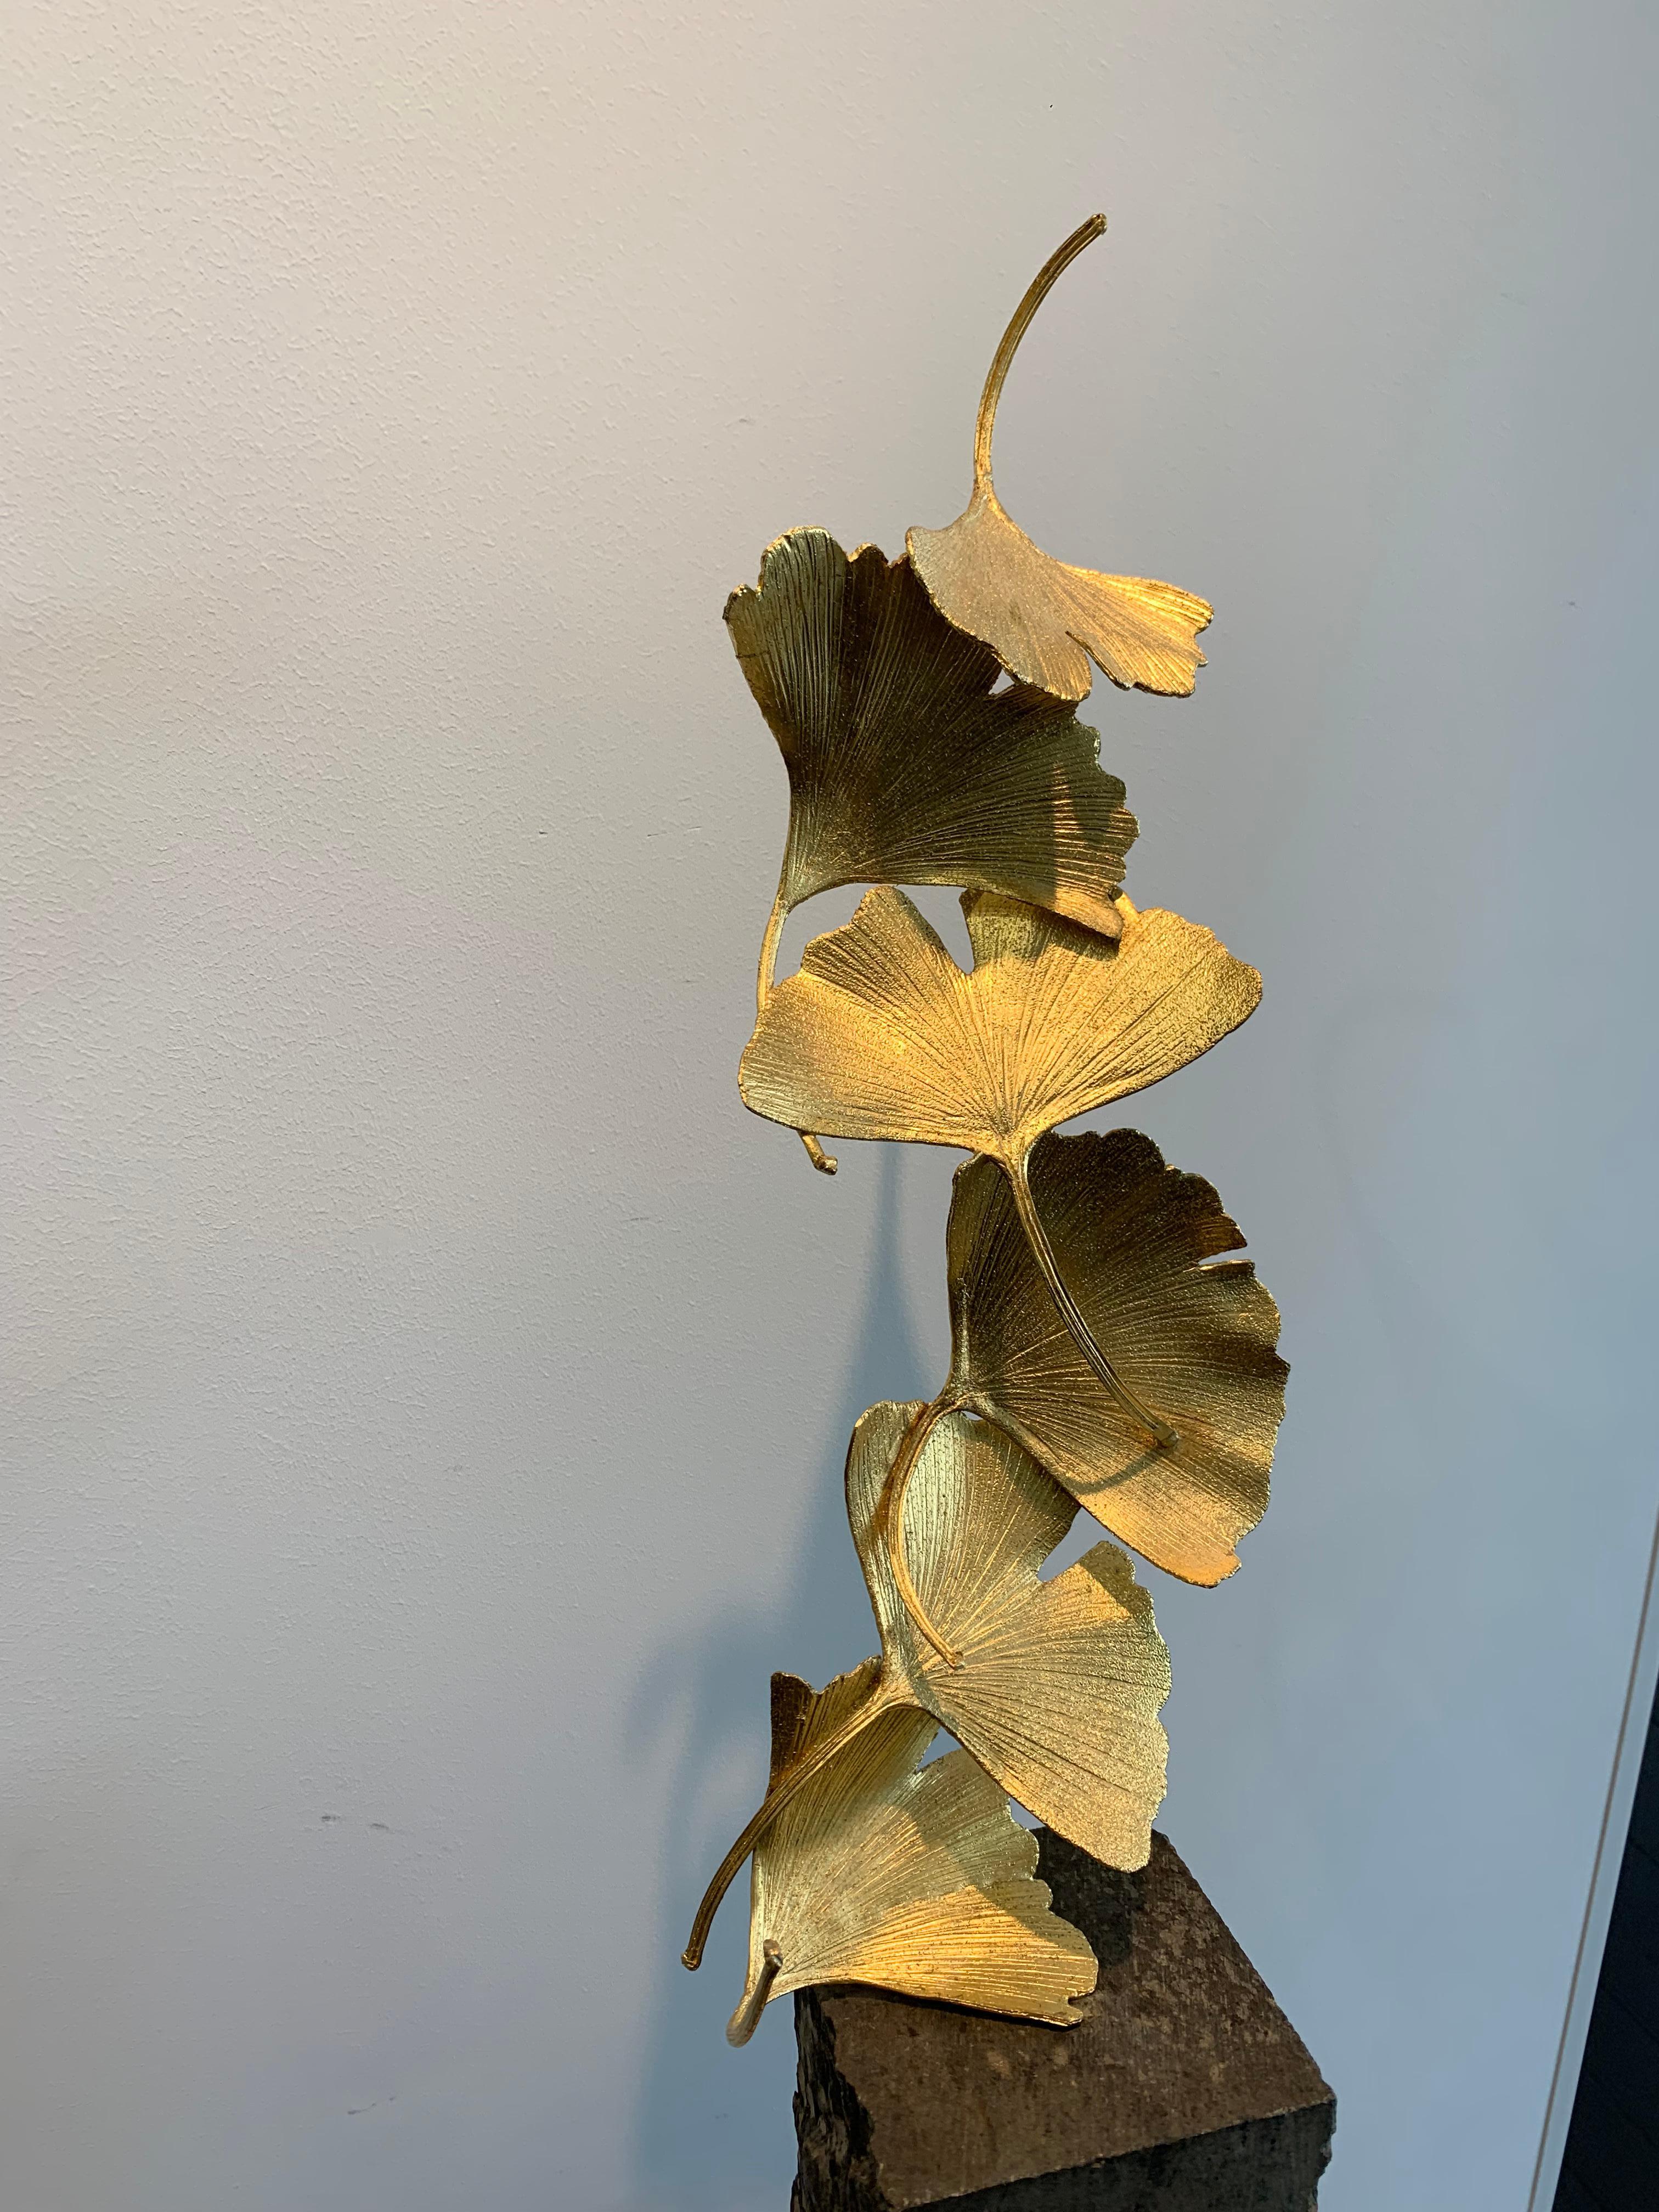 6 Golden Gingko Leaves - 24 k Gilded Cast Brass sculpture on rough stone base - Contemporary Sculpture by Kuno Vollet